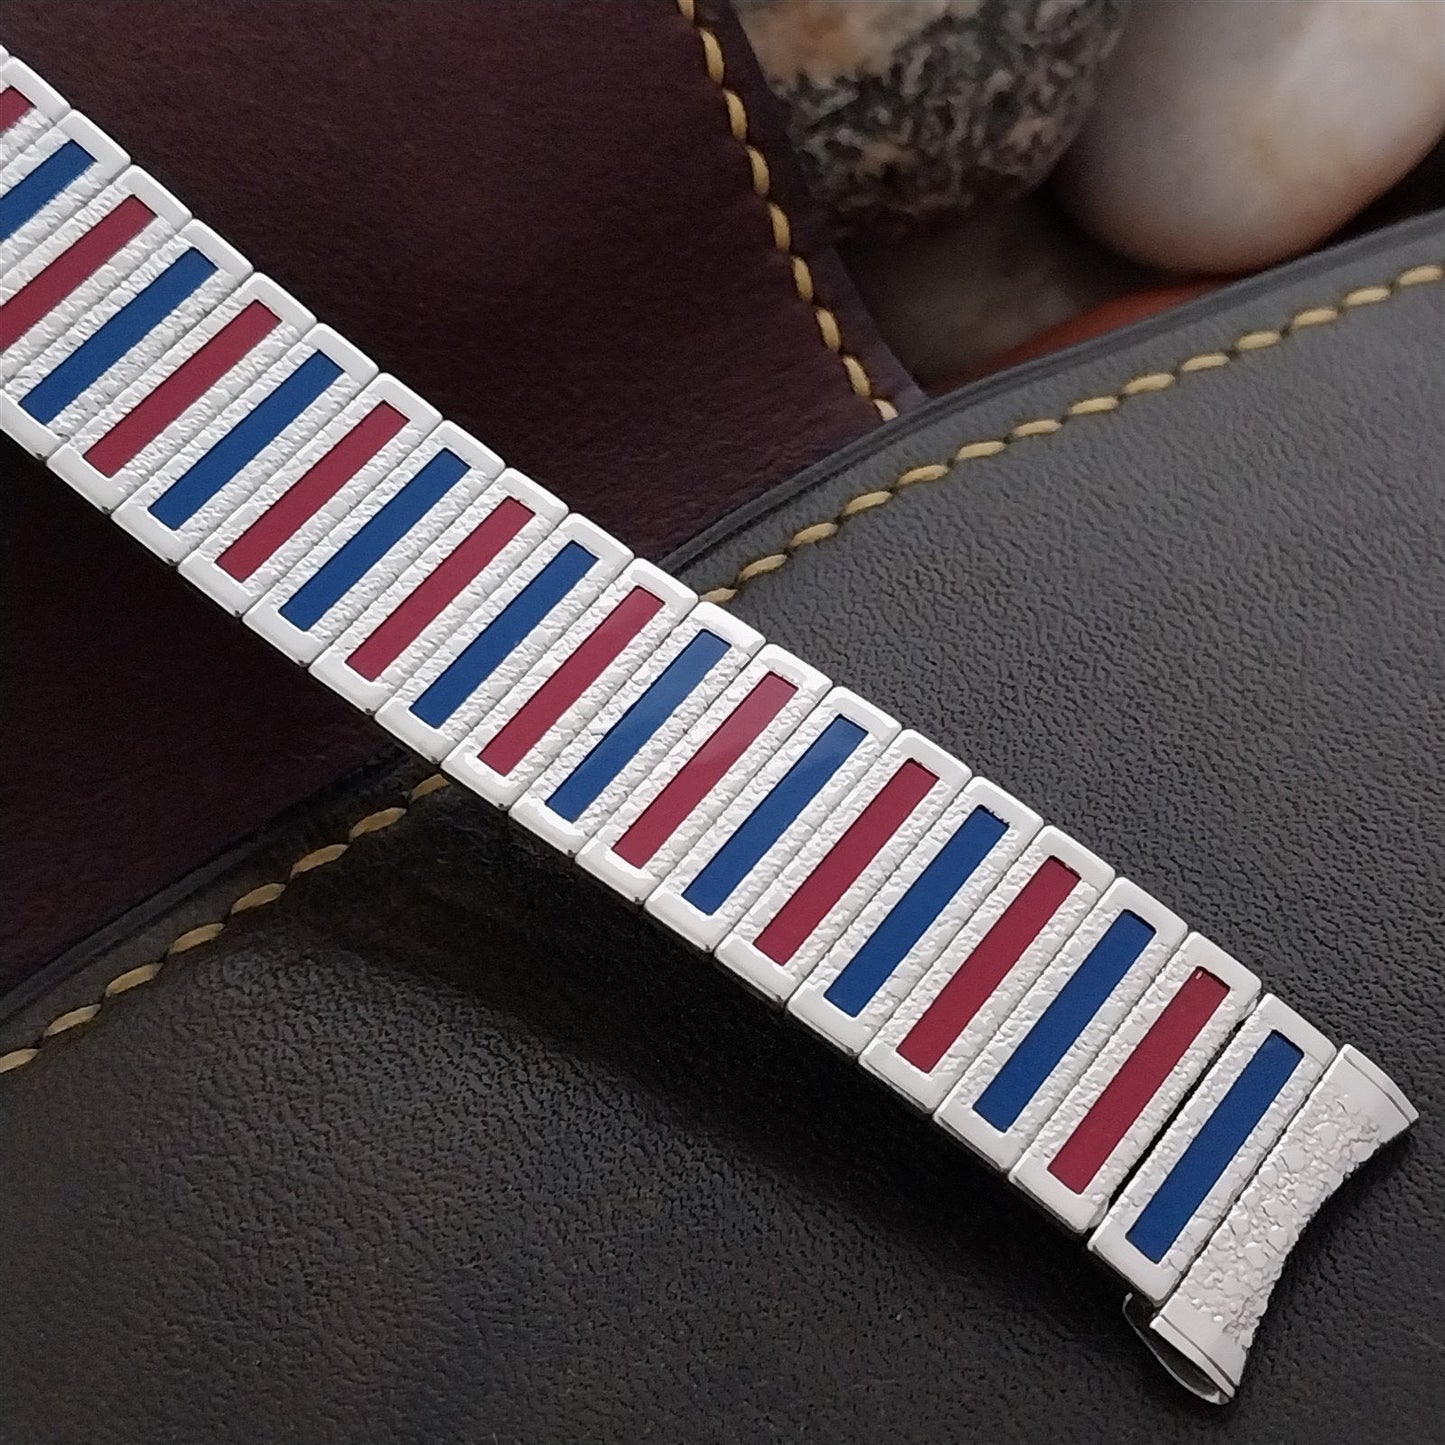 17.2mm Uniflex Stainless Steel Stretch Red& Blue Unused 1960s Vintage Watch Band